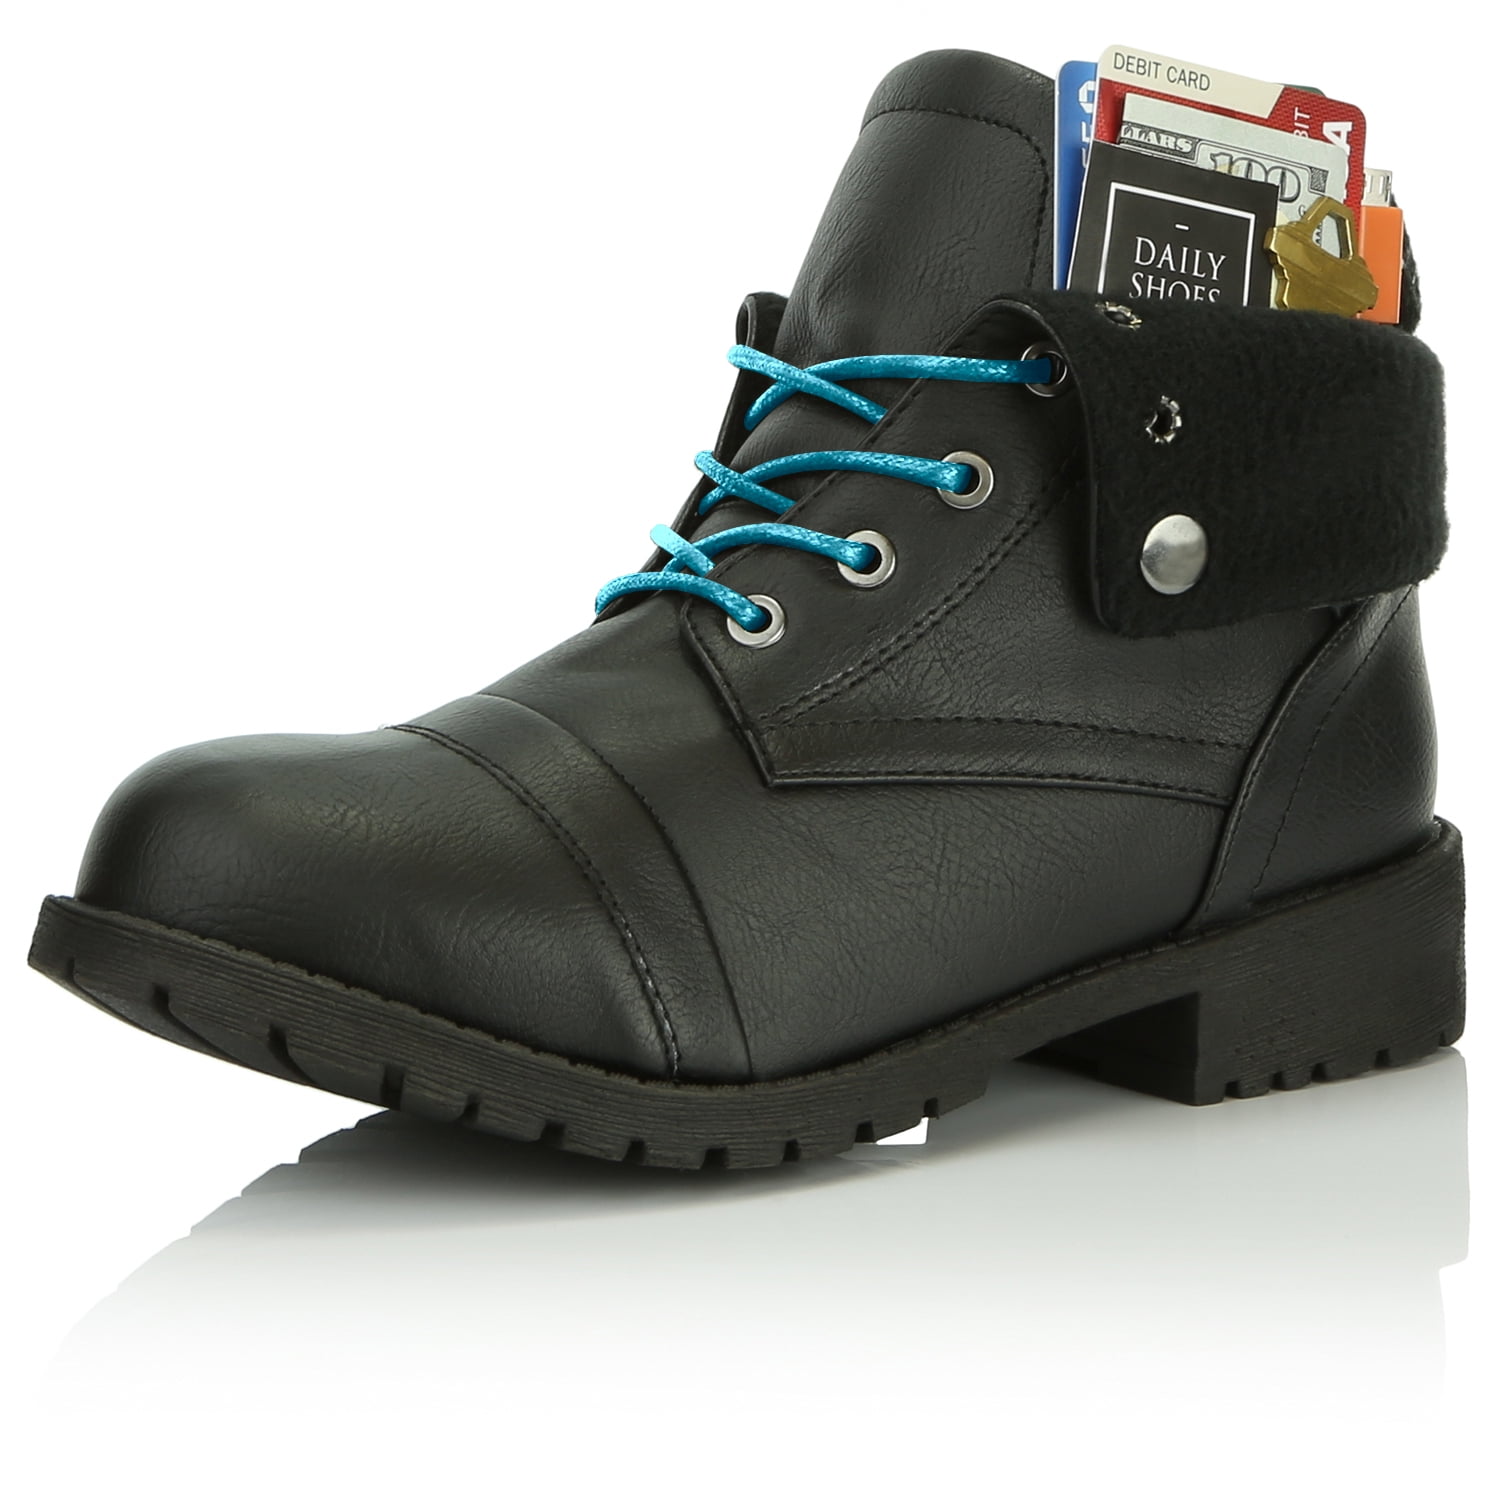 DailyShoes Female Boots Ankle Ankle 